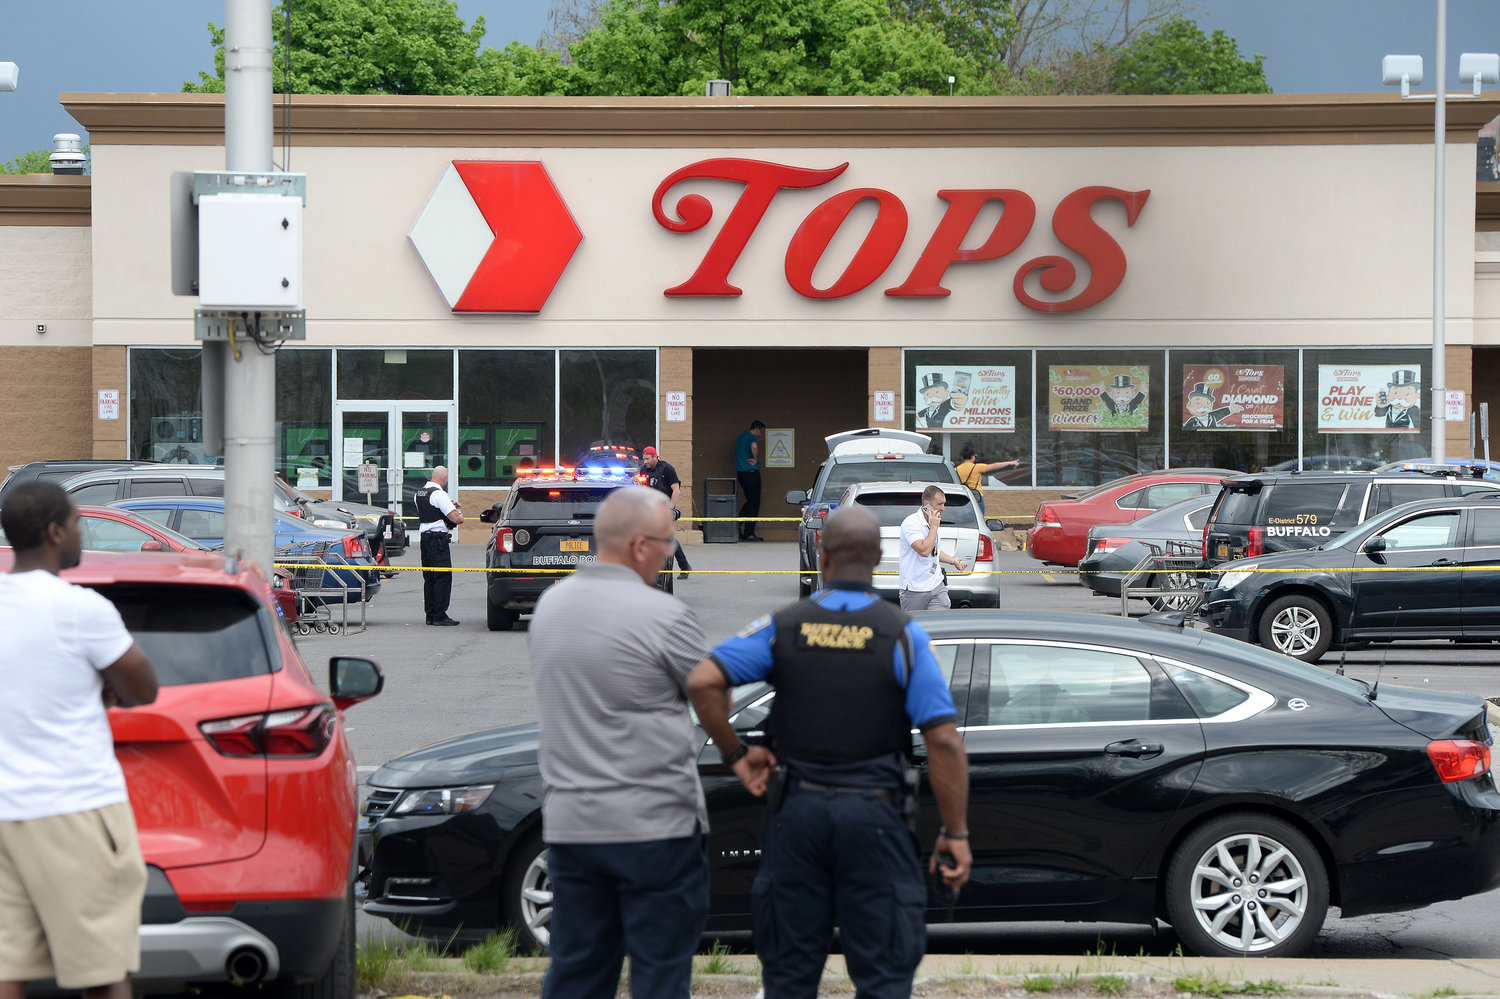 Police on scene at a Tops Friendly Market on Saturday, May 14, 2022, in Buffalo, New York. According to reports, at least 10 people were killed after a mass shooting at the store, with the shooter in police custody. (John Normile/Getty Images/TNS)